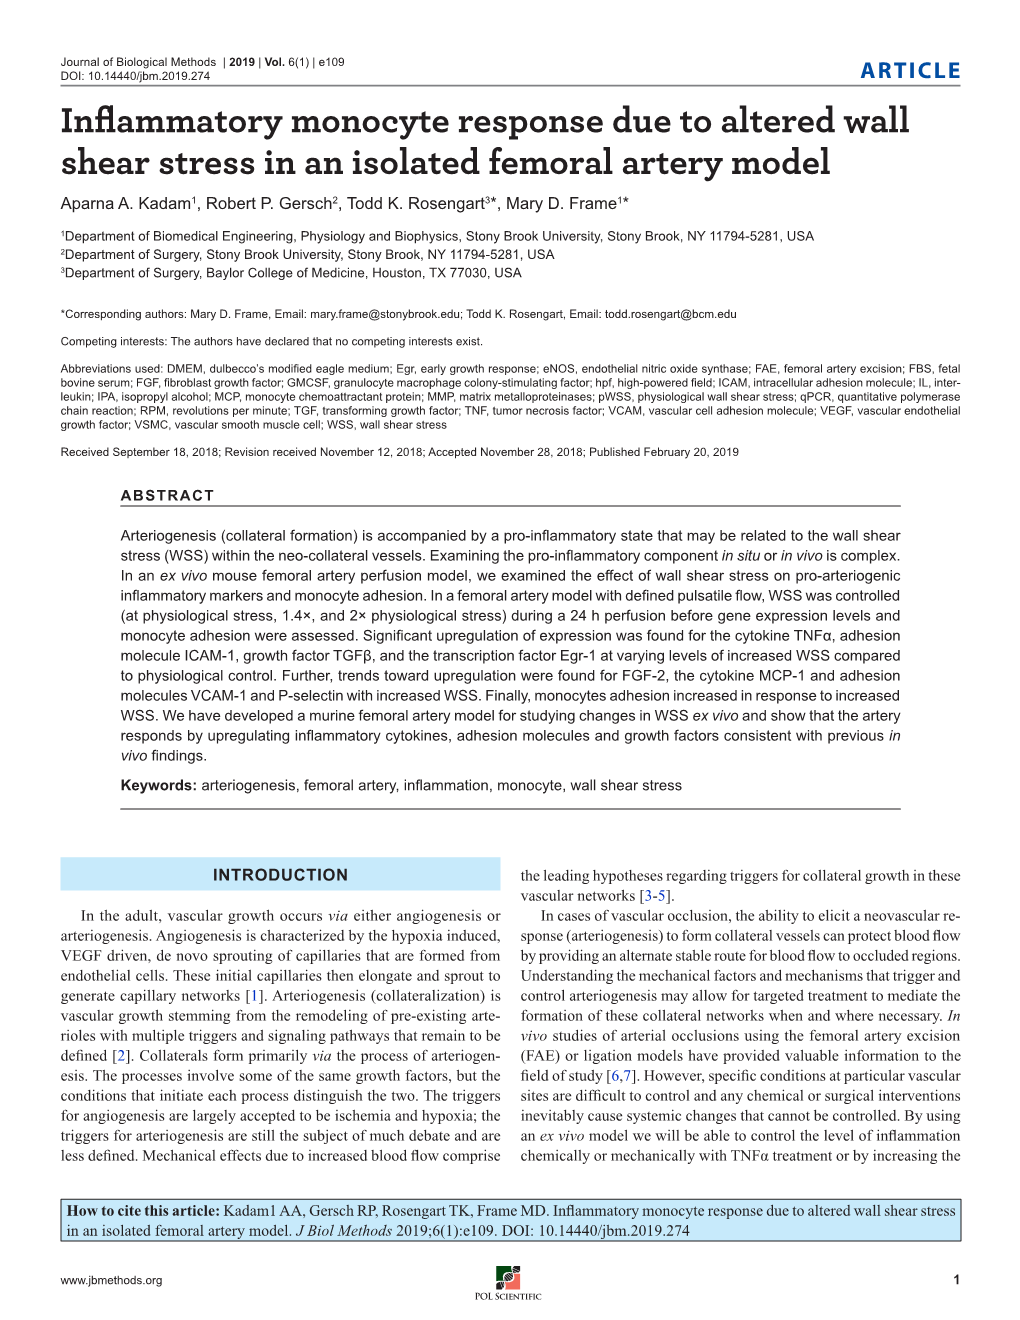 Inflammatory Monocyte Response Due to Altered Wall Shear Stress in an Isolated Femoral Artery Model Aparna A